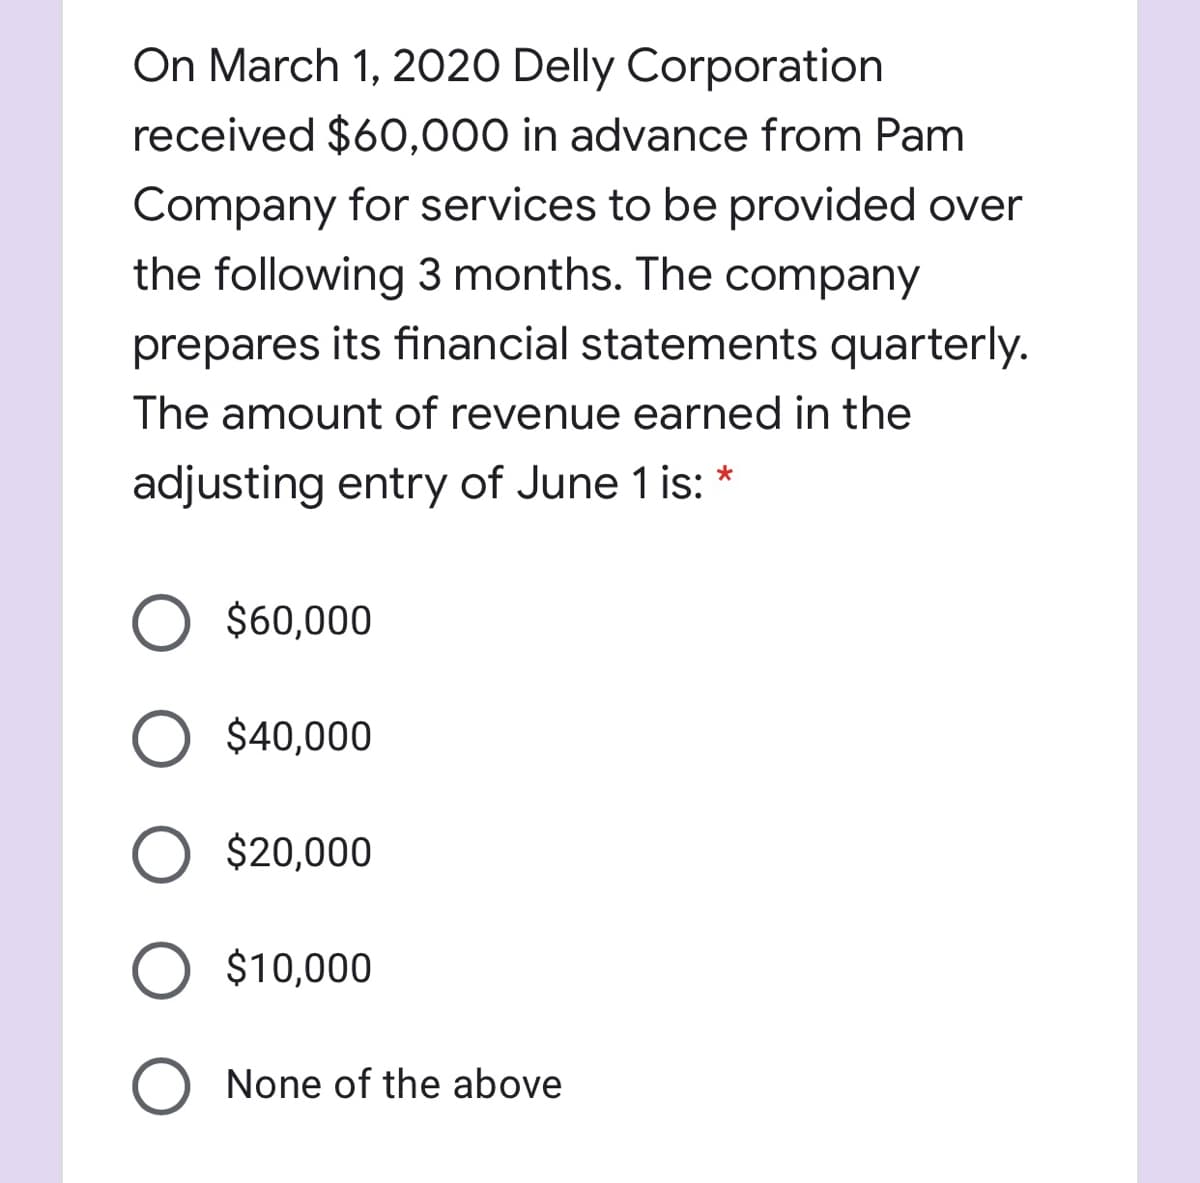 On March 1, 2020 Delly Corporation
received $60,000 in advance from Pam
Company for services to be provided over
the following 3 months. The company
prepares its financial statements quarterly.
The amount of revenue earned in the
adjusting entry of June 1 is:
$60,000
O $40,000
O $20,000
$10,000
None of the above
